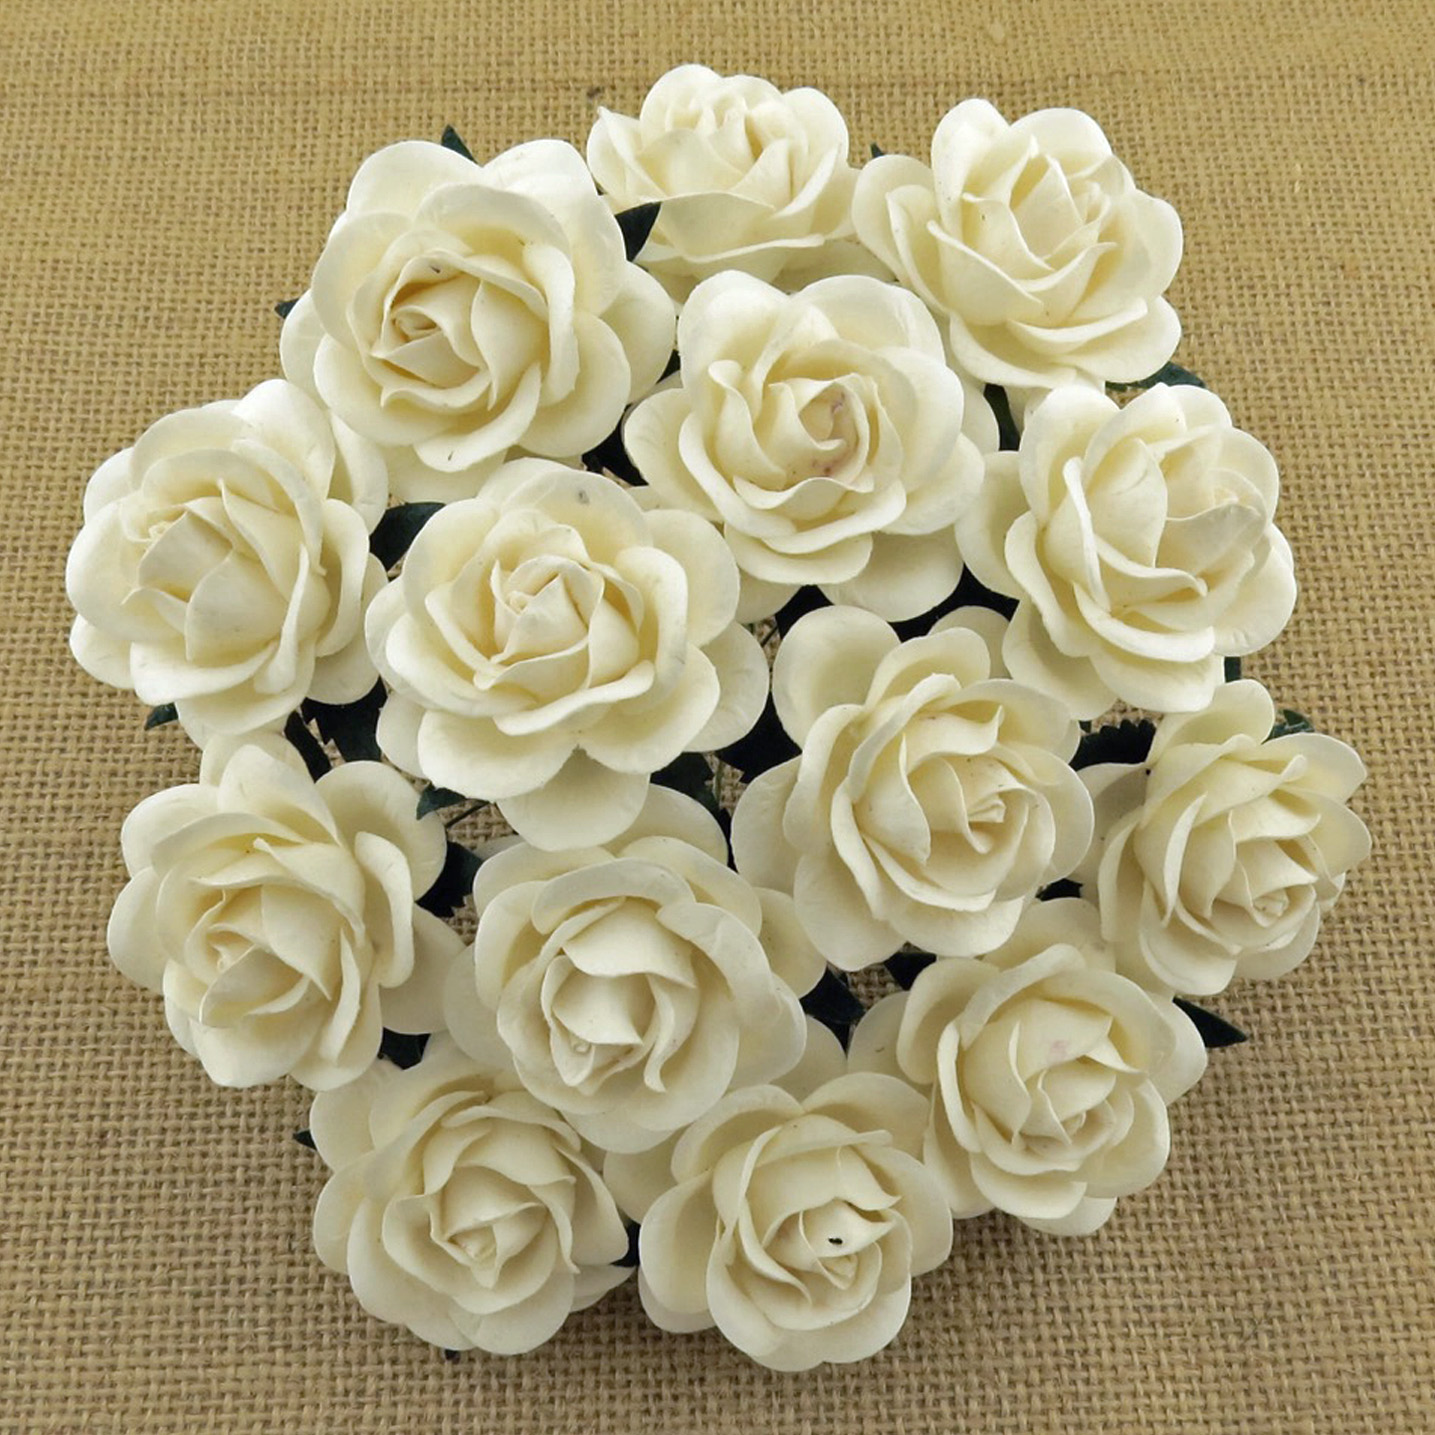 50 IVORY MULBERRY PAPER TRELLIS ROSES